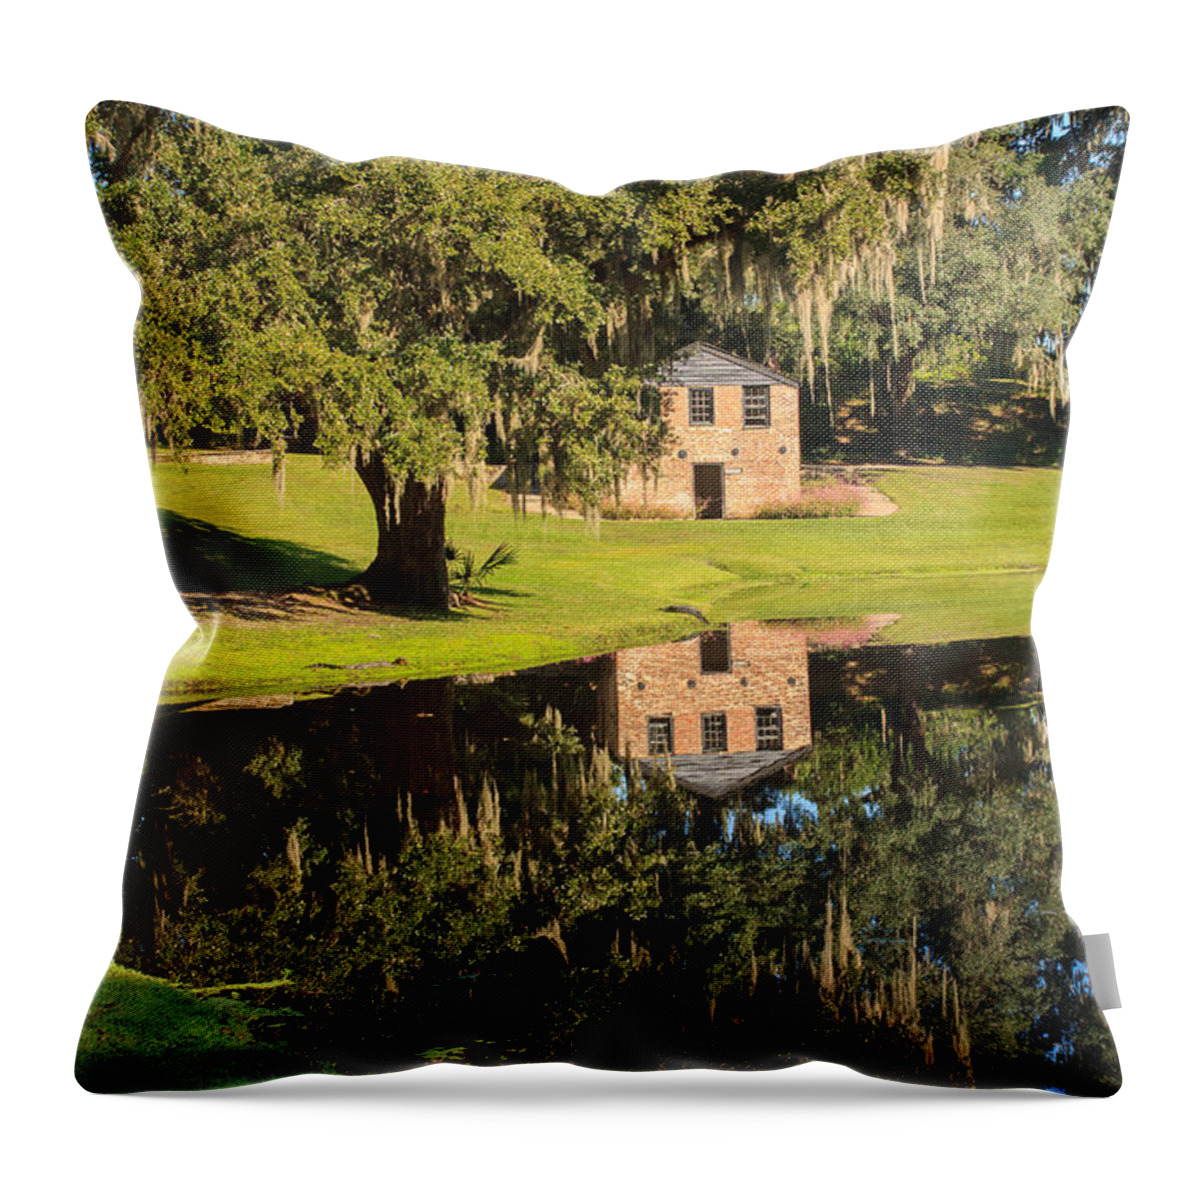 Rice Mill Throw Pillow featuring the photograph Rice Mill Pond Reflection by Patricia Schaefer